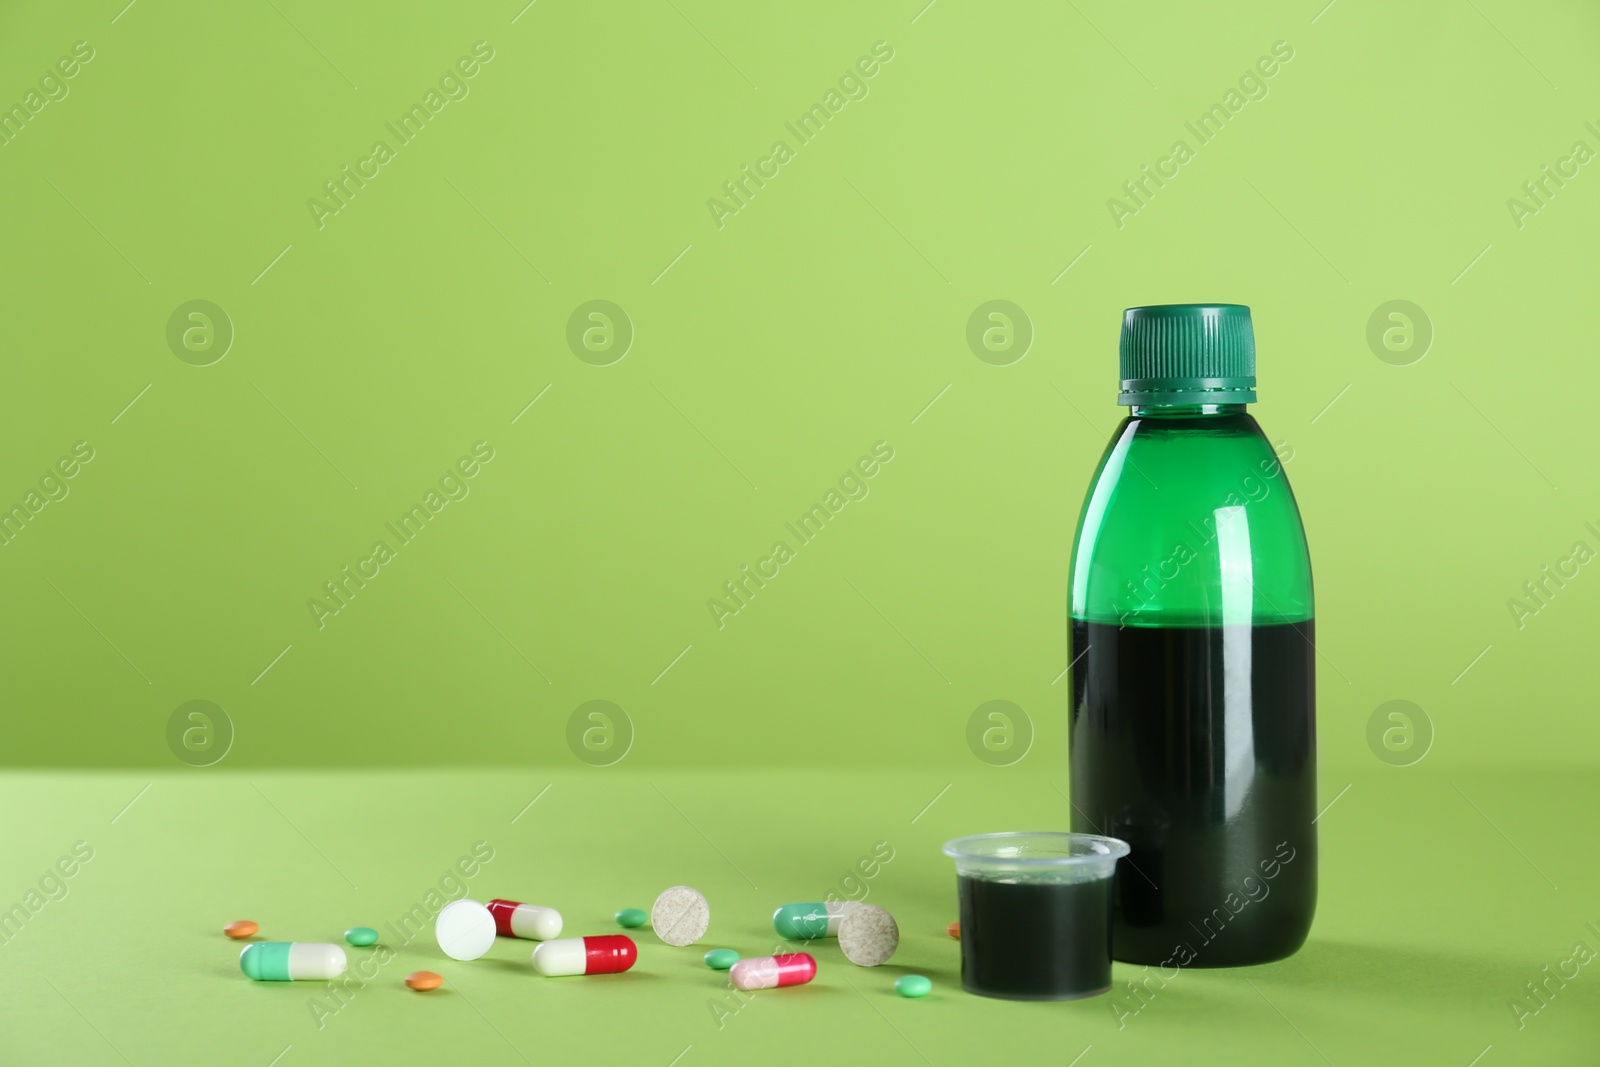 Photo of Bottle of cough syrup, measuring cup and pills on light green background. Space for text